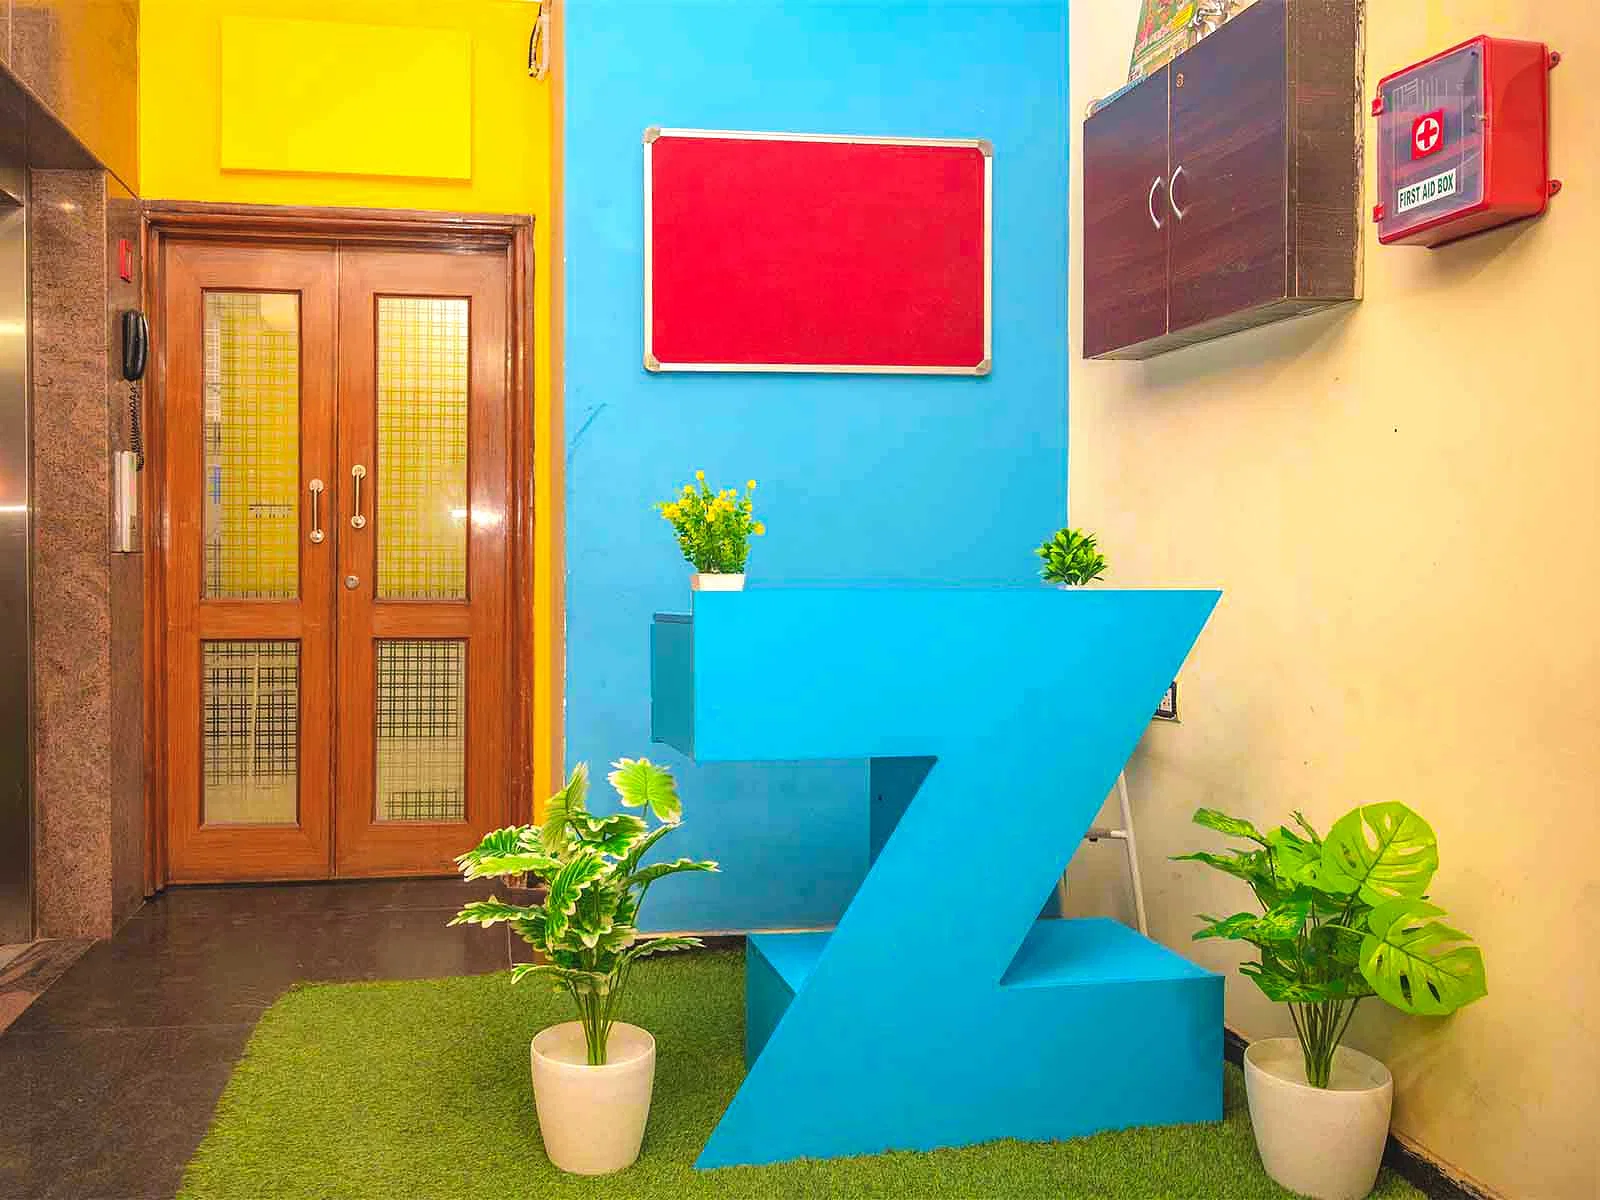 budget-friendly PGs and hostels for unisex with single rooms with daily hopusekeeping-Zolo Nebula